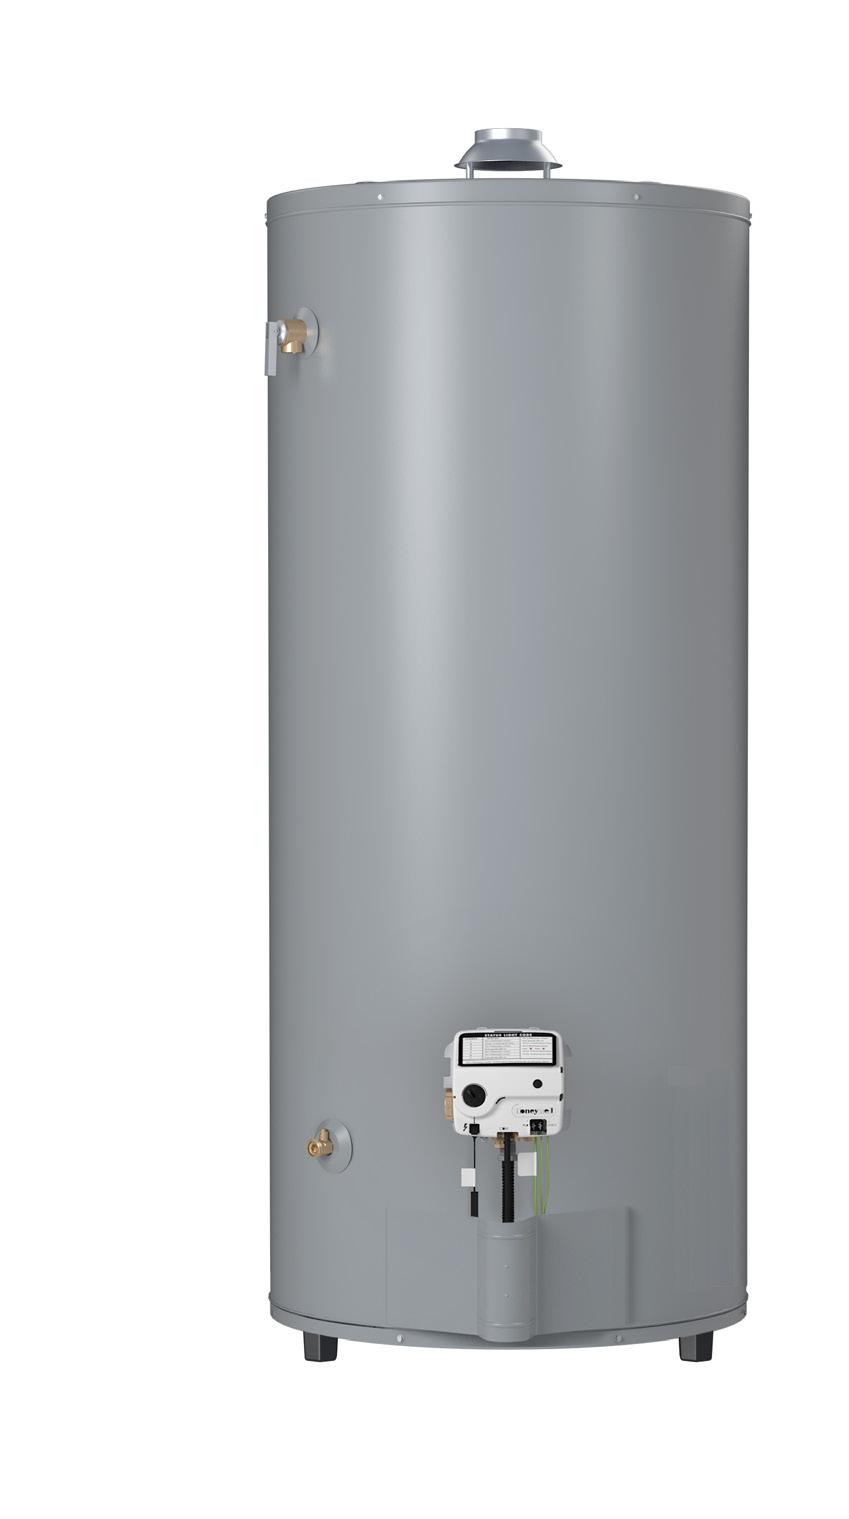 Instruction Manual COMMERCIAL GAS WATER HEATERS INSTALLATION - OPERATION - SERVICE - MAINTENANCE Low Lead Content WARNING: If the information in these instructions is not followed exactly, a fire or